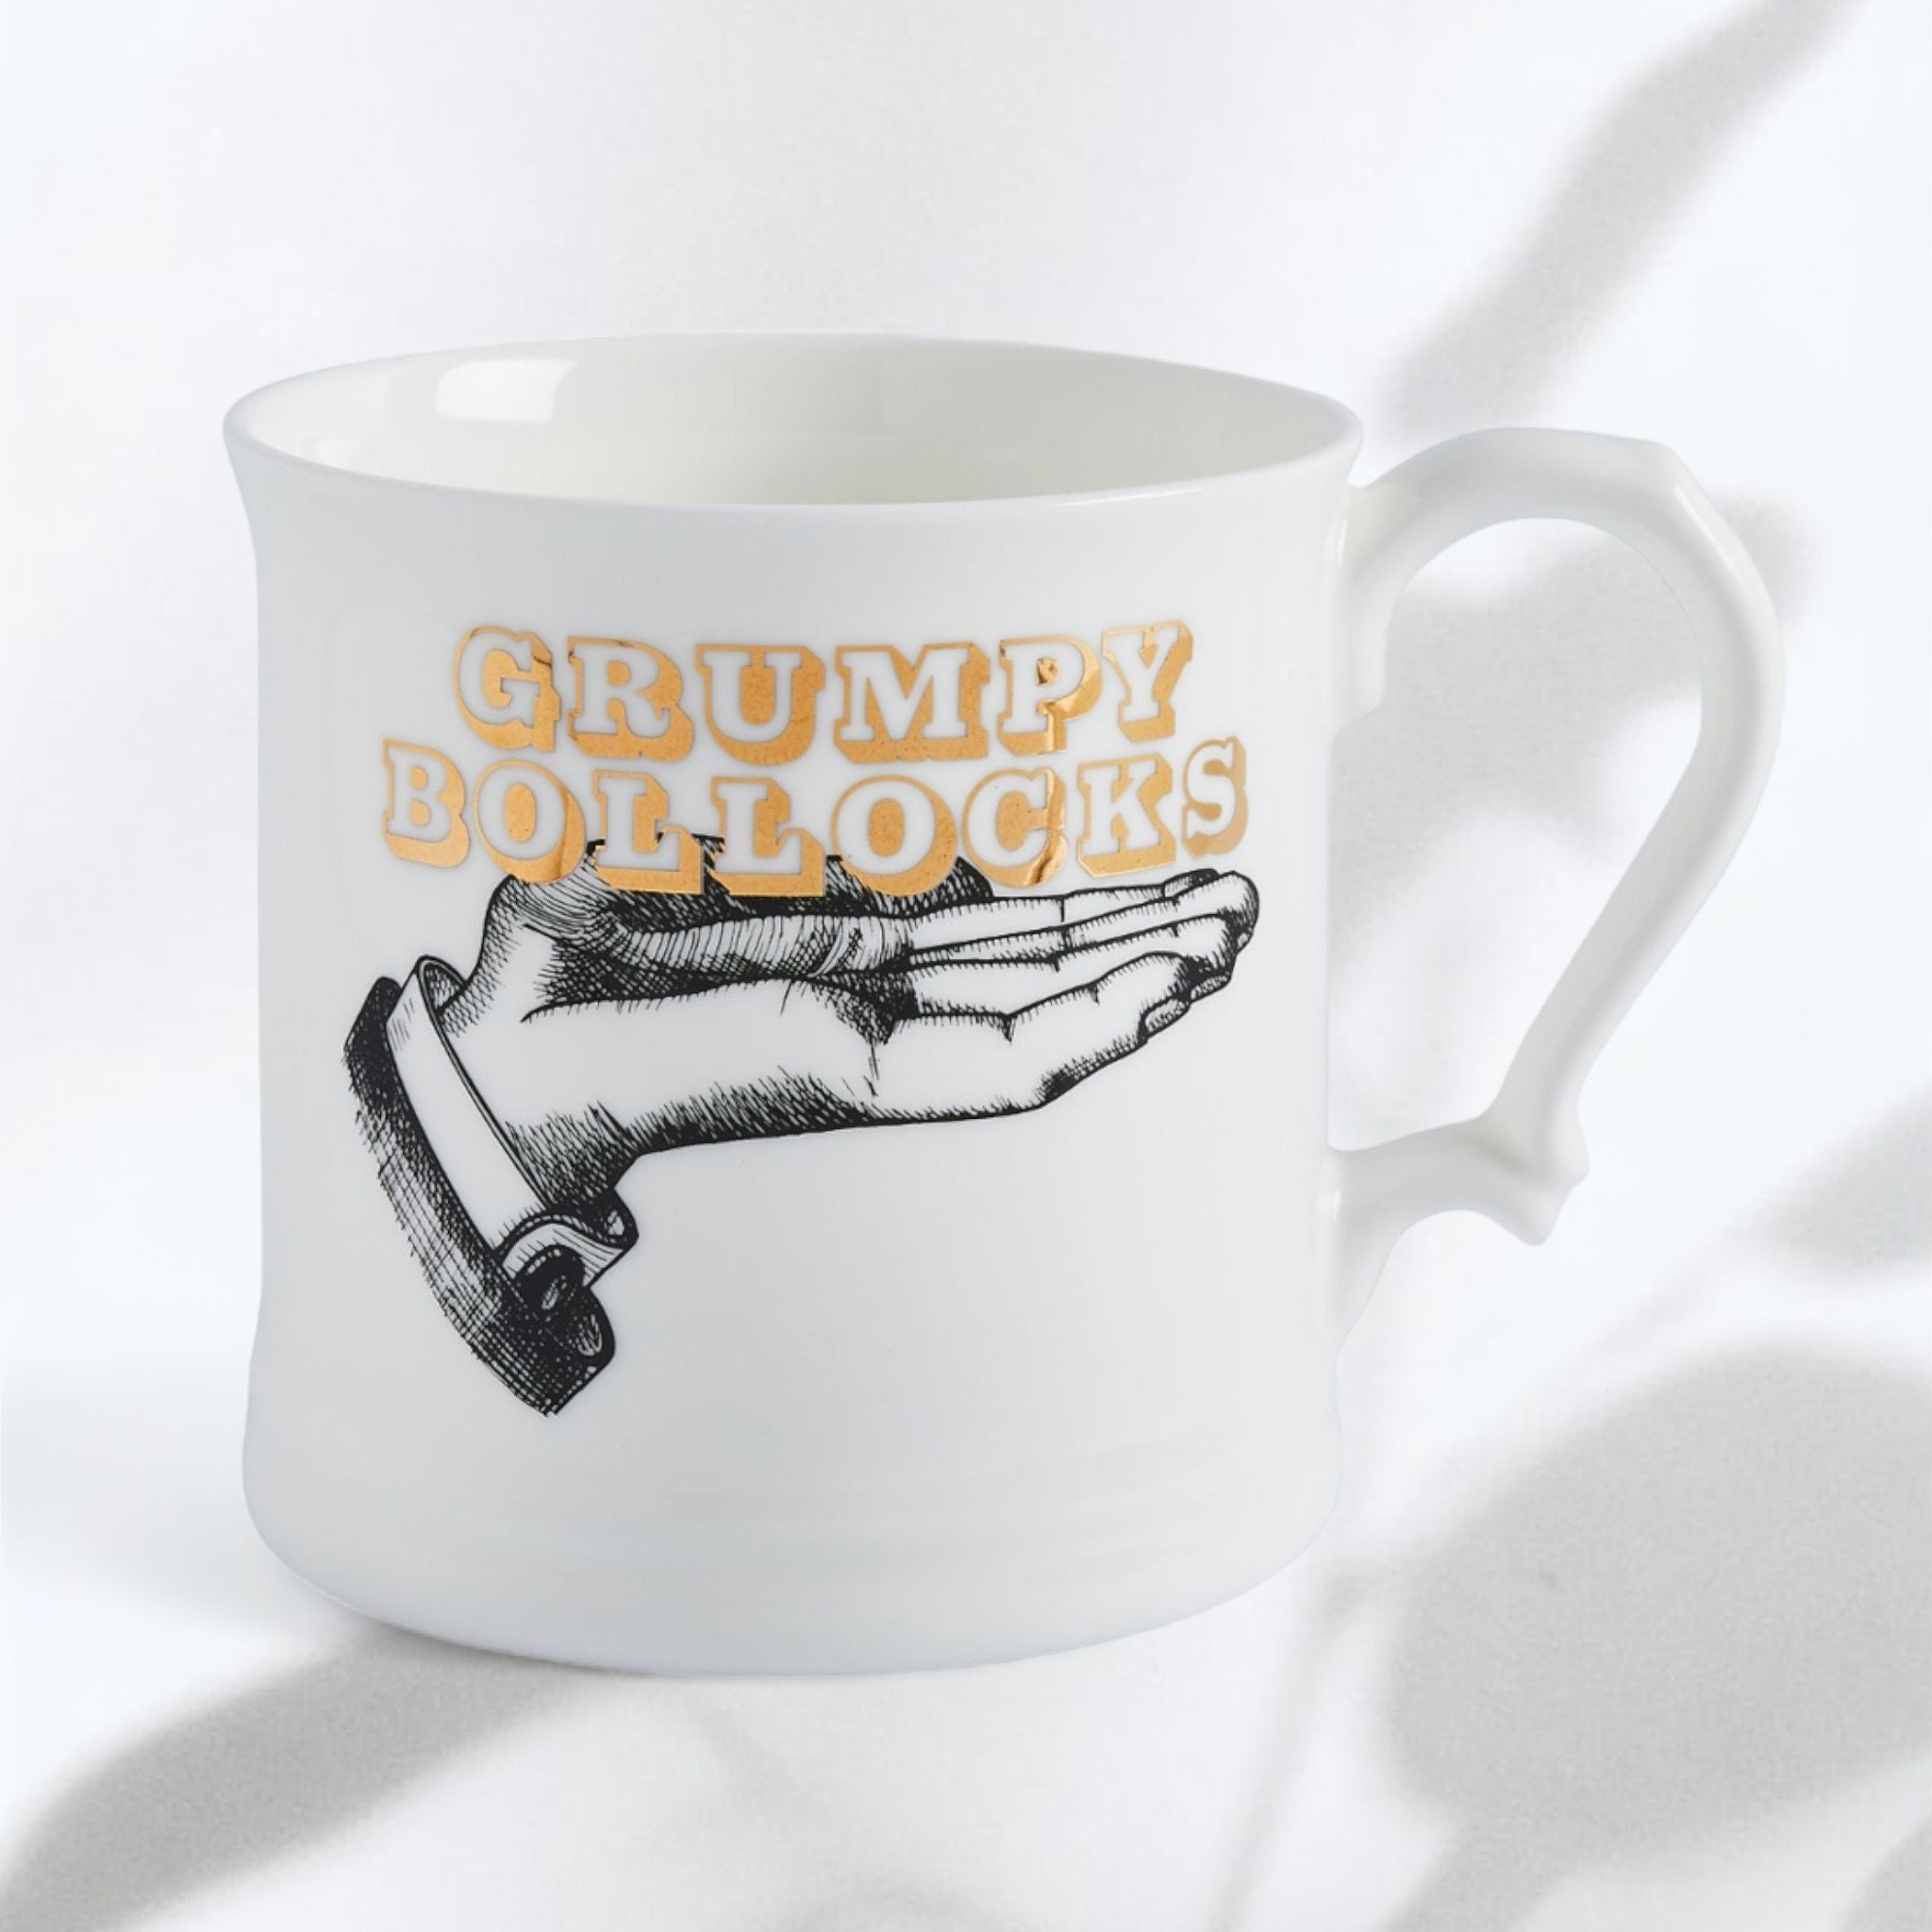 Funny cup, funny gifts, inappropriate gifts, rude gifts, OCK Mug for  Zoom/Skype meetings, perfect funny gift or secret Santa